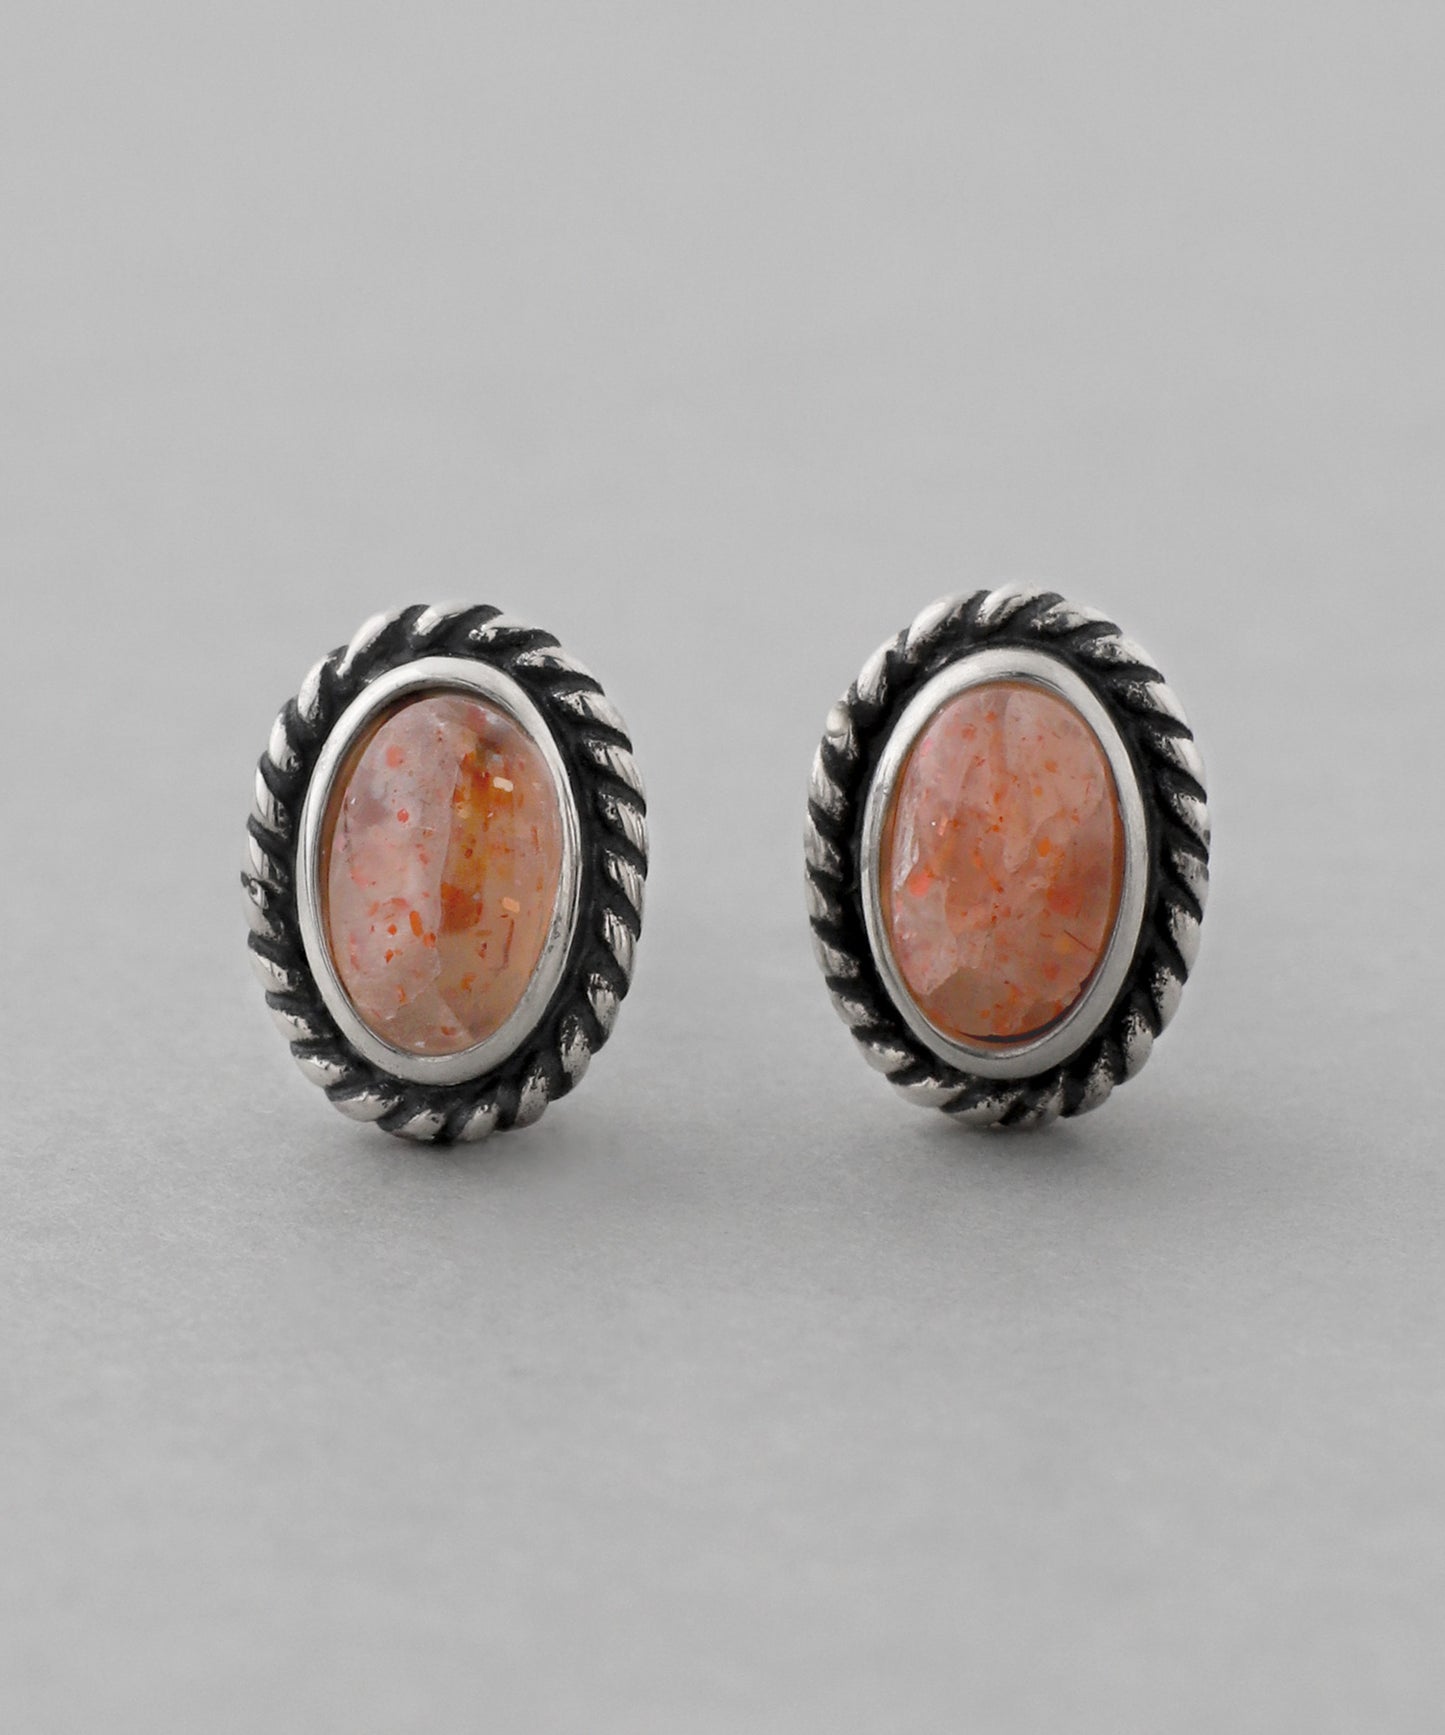 【Eligible for Novelty】Vintage Earrings [925 silver][I]